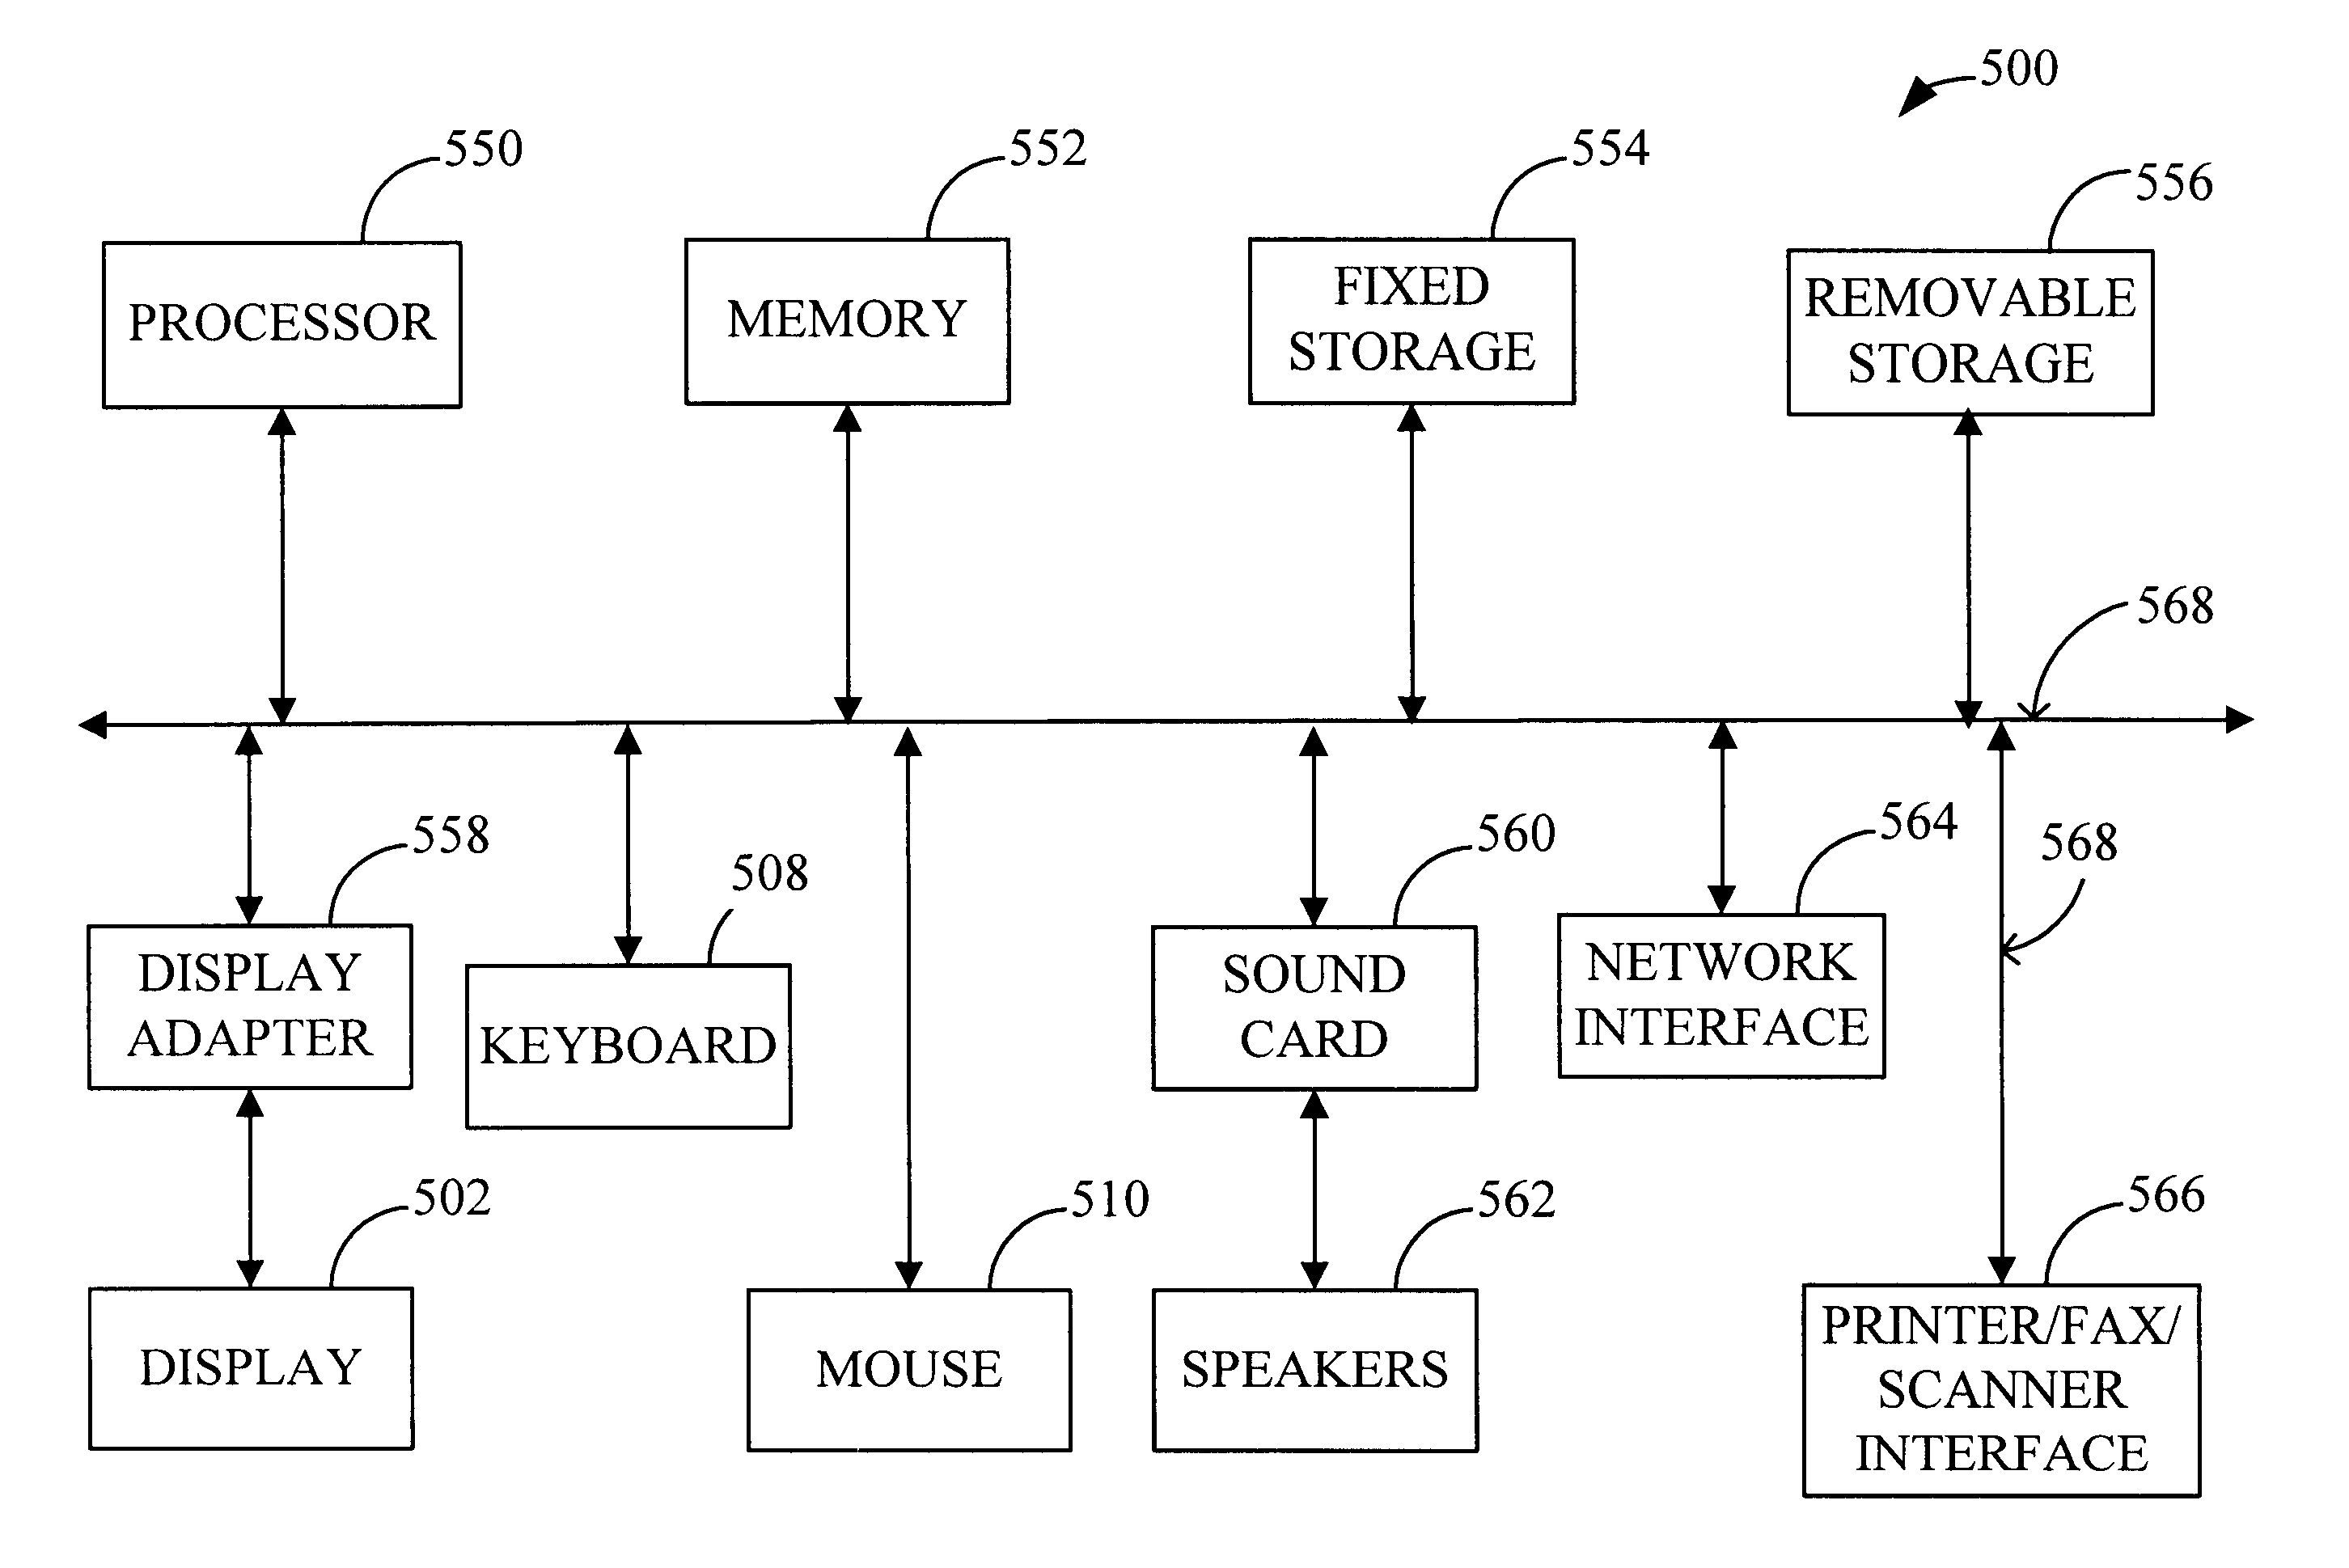 Method and system for protecting a computer using a remote e-mail scanning device